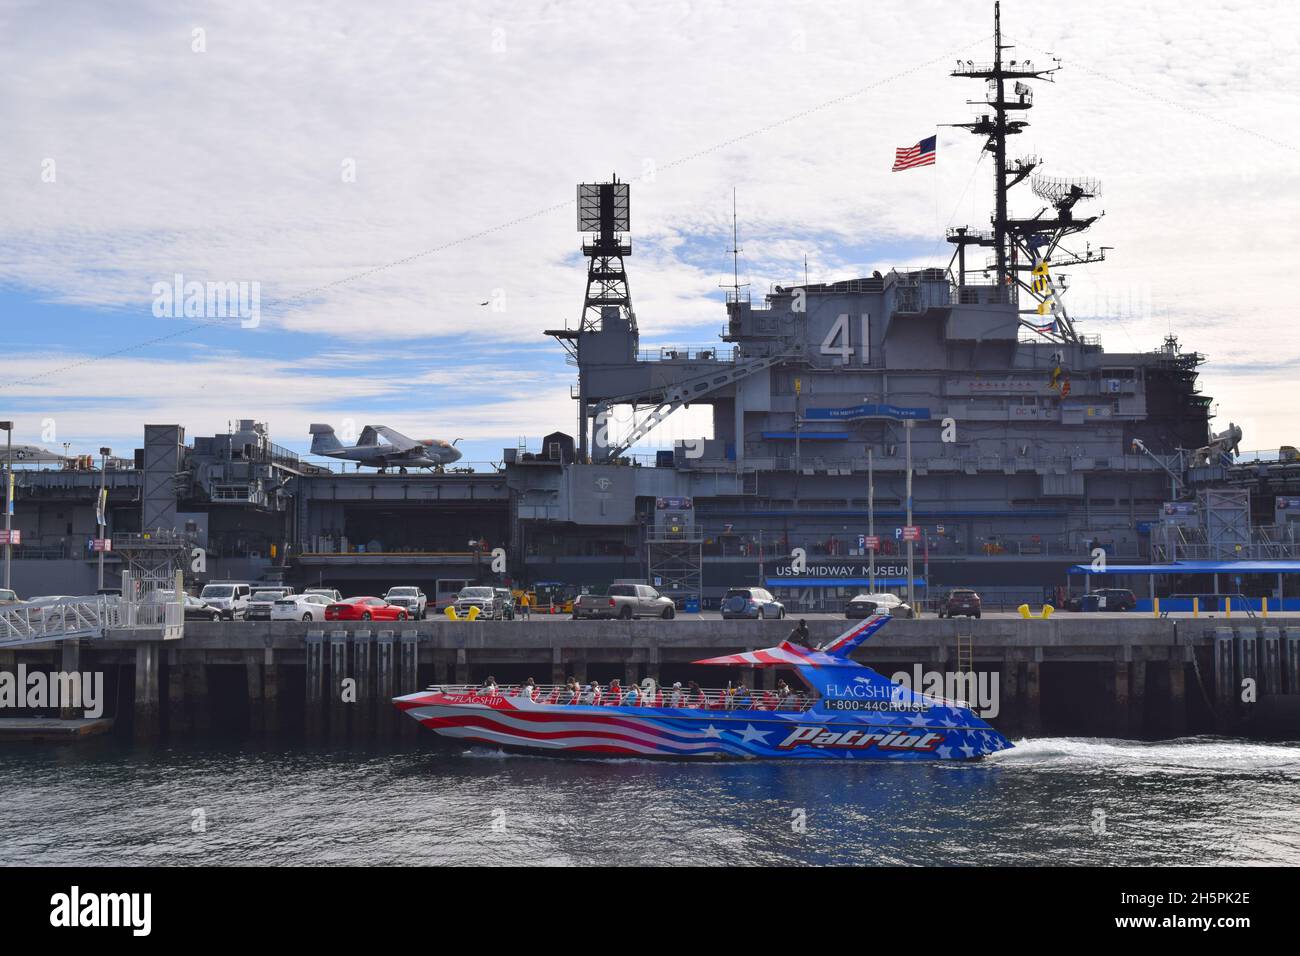 View of USS Midway, which served in WWII; now a museum ship moored in San Diego, California.  Tourist boat in the foreground.  Tower in the background Stock Photo